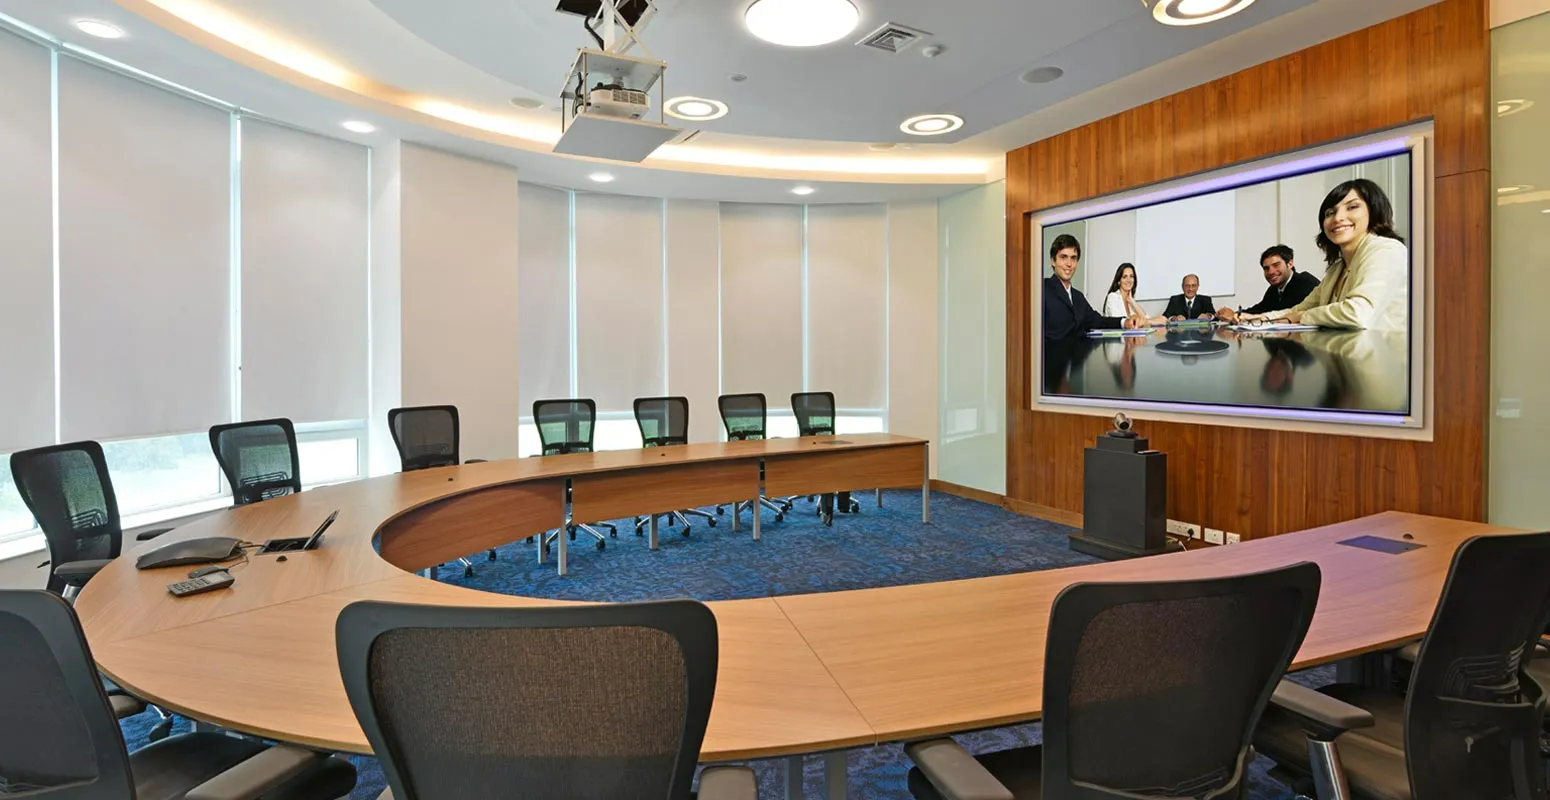 14-seater U-Shaped Video Conferencing room